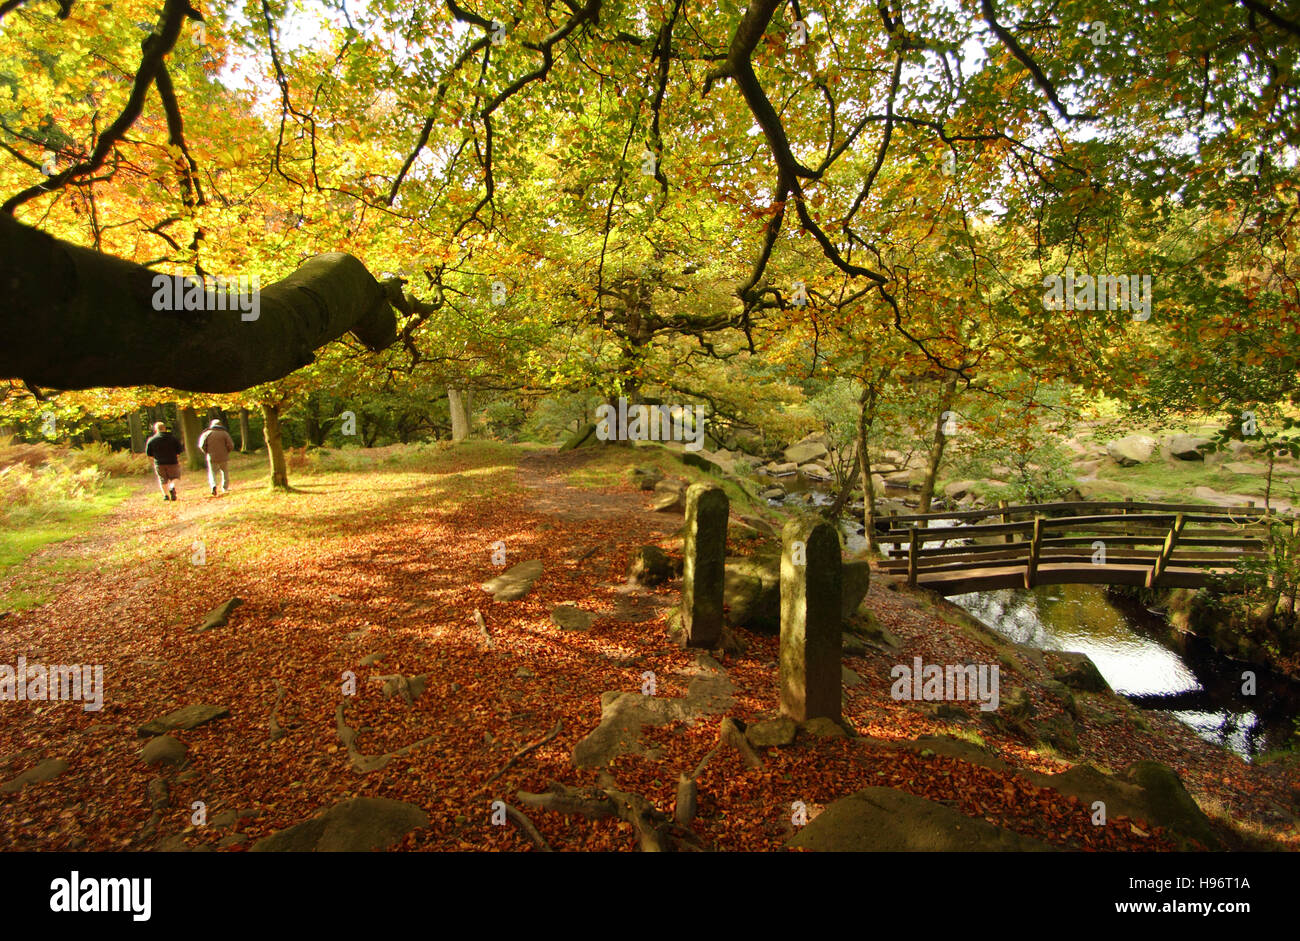 Autumn foliage in Padley Gorge; a scenic wooded valley peppered with public footpaths in the Peak District, Derbyshire, UK Stock Photo